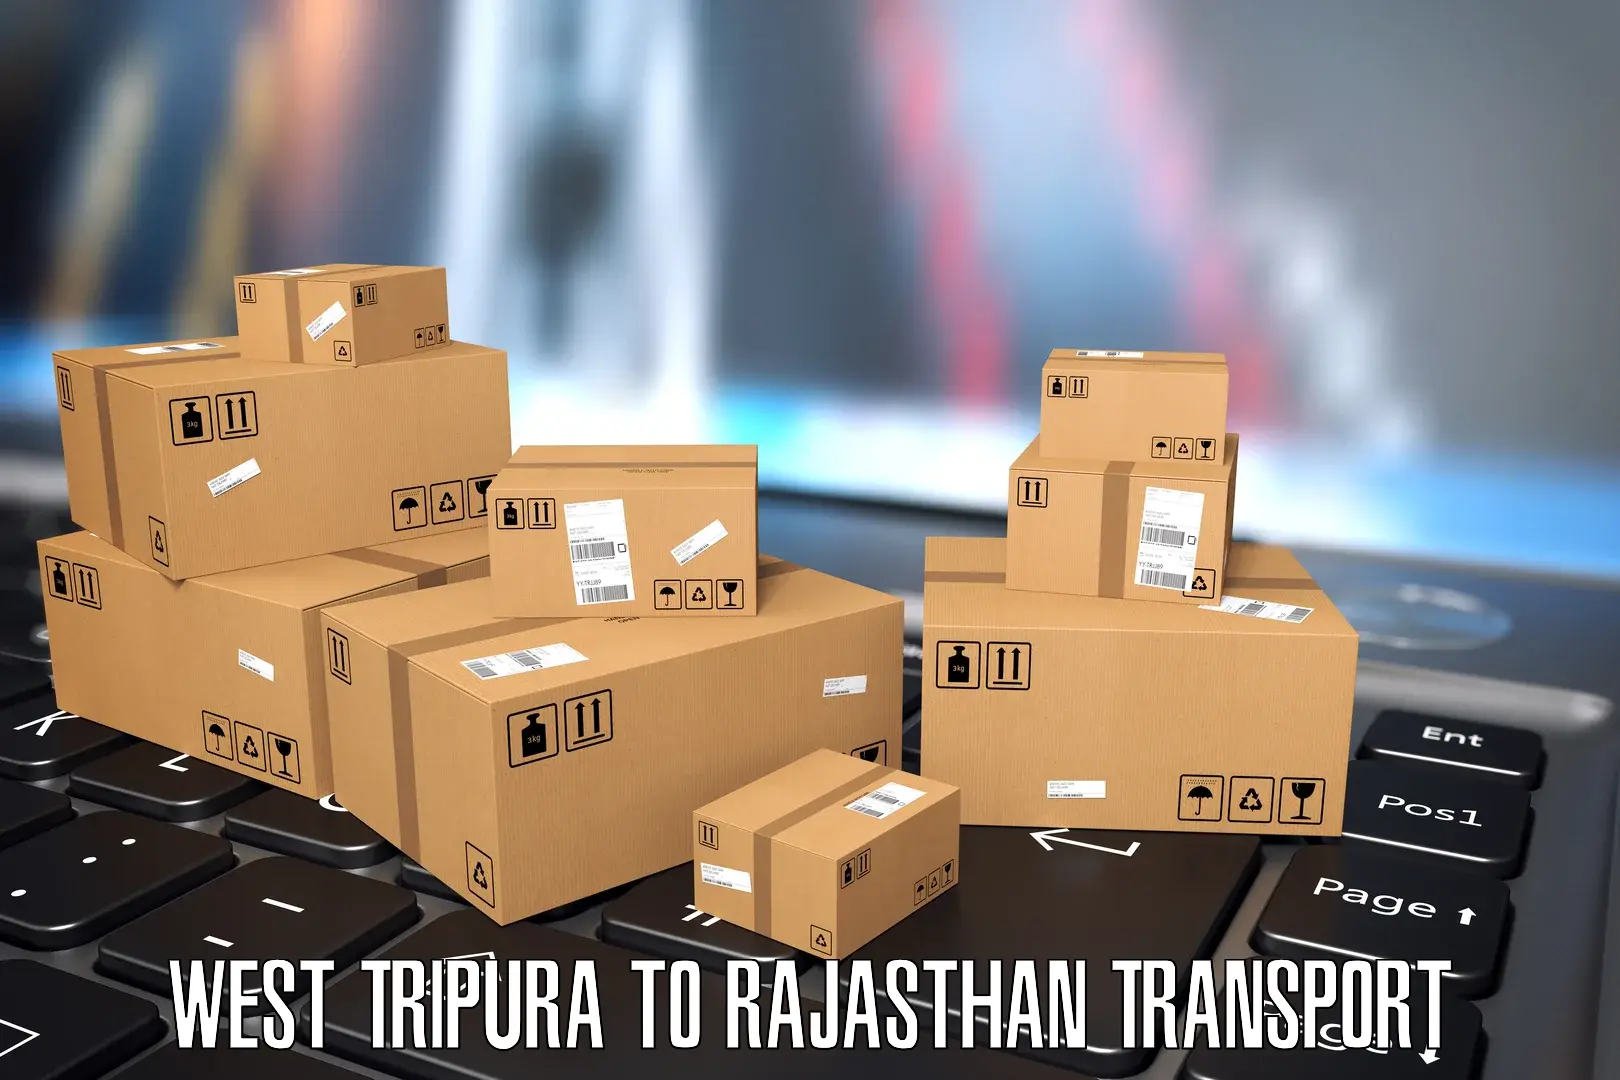 Container transport service West Tripura to Sikar